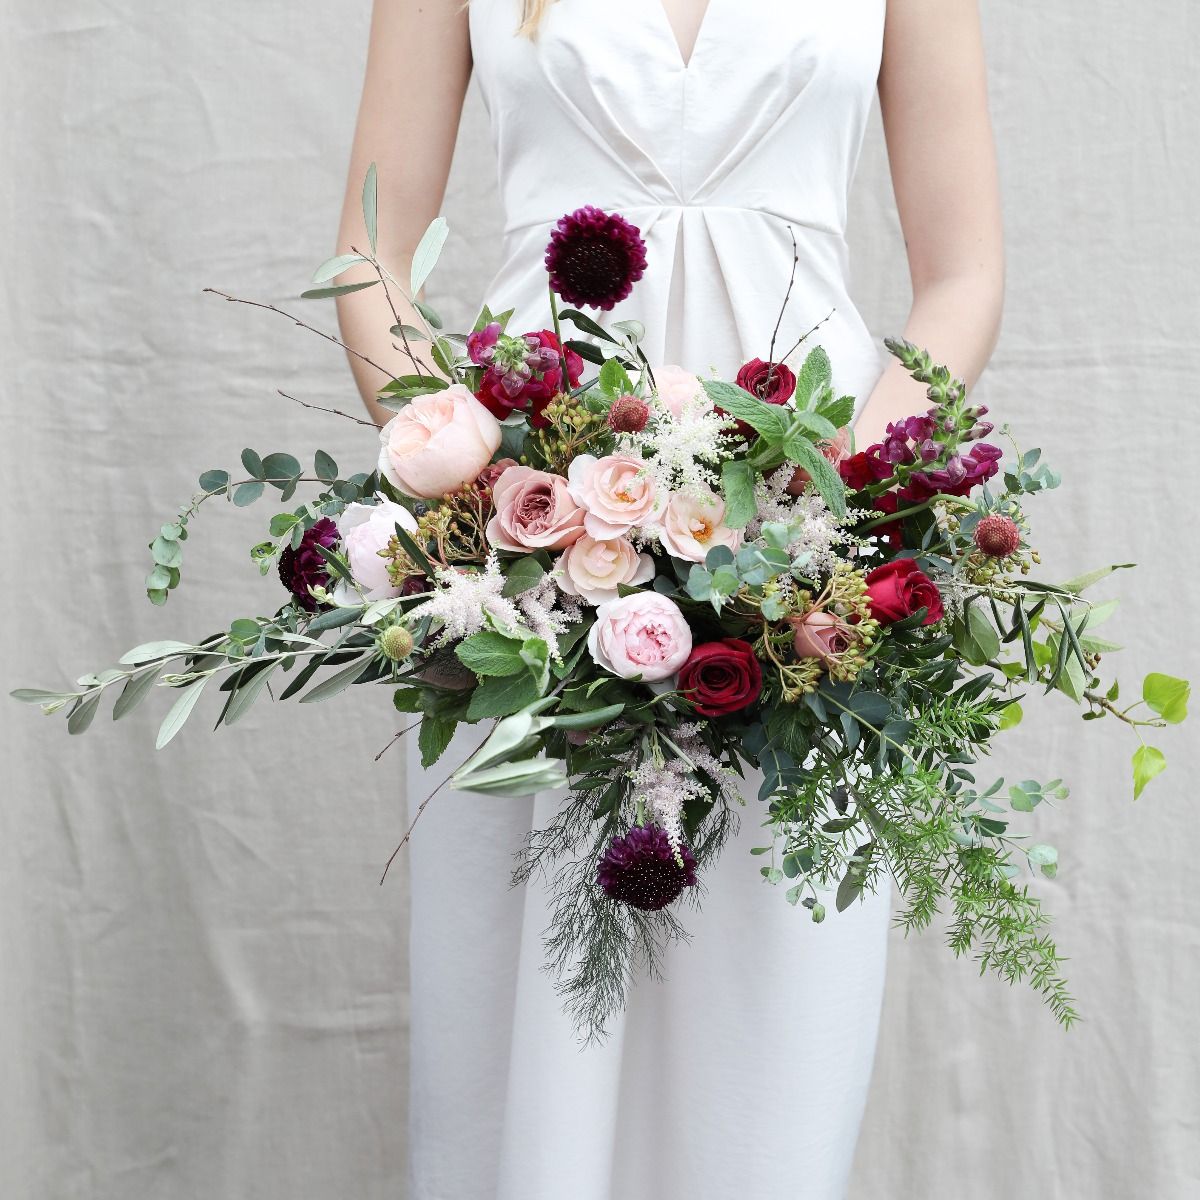 Introducing Our New Wedding Bouquet Collection | The Real Flower